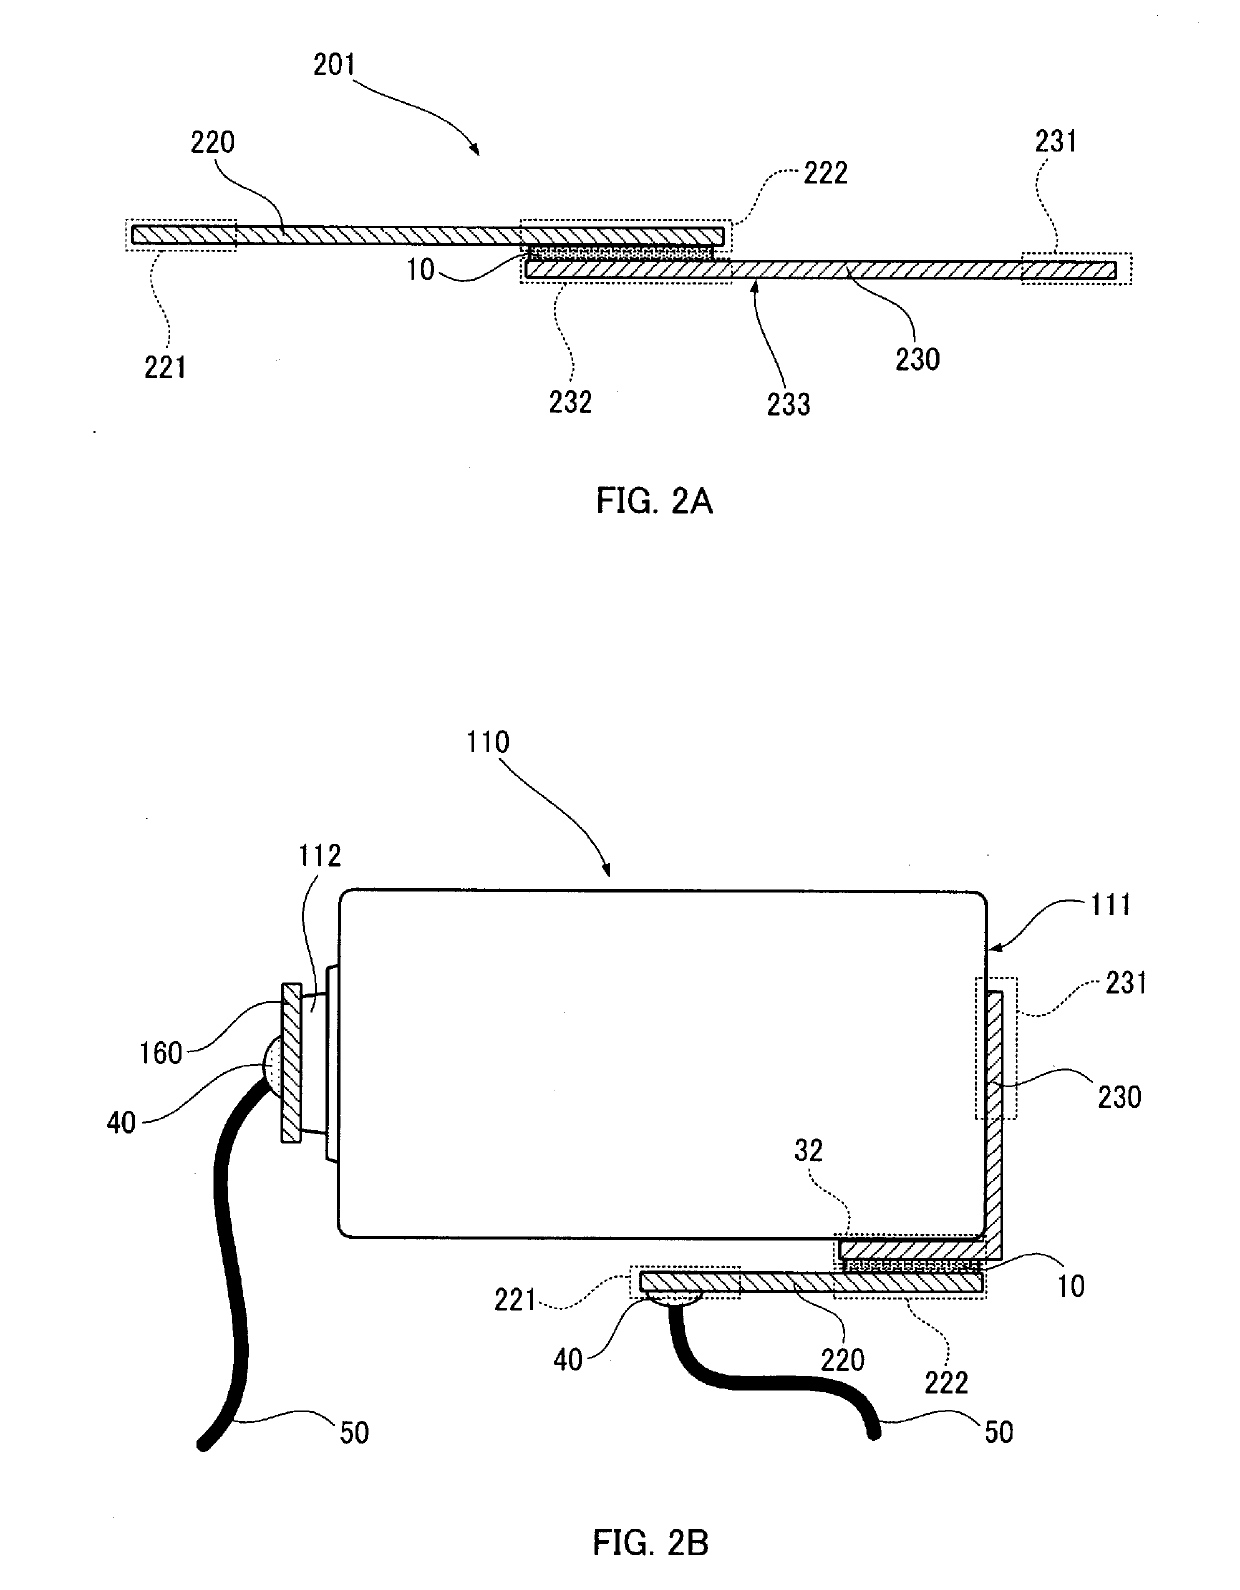 Externally-attached PTC element and tubular battery